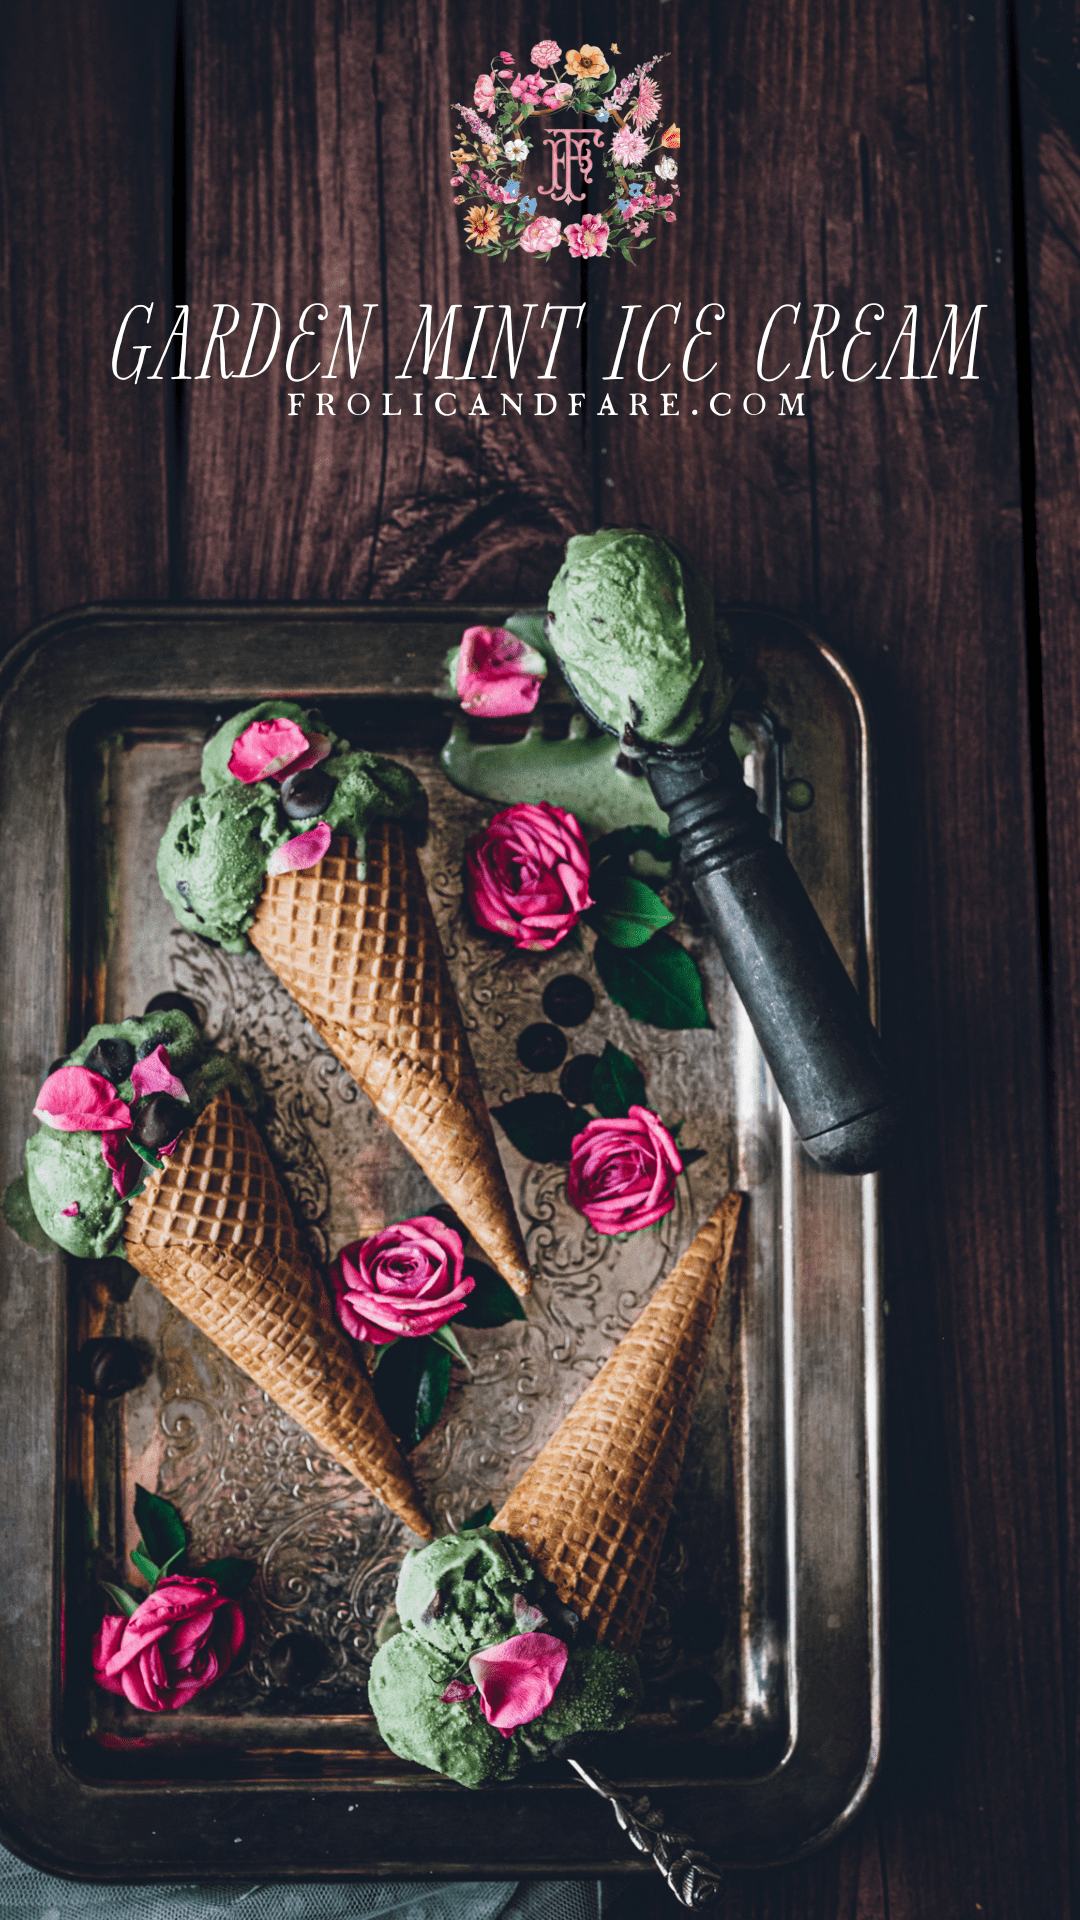 rustic silver tray with ice cream cones with natural green scoops of ice cream and dark chocolate chips and vibrant pink rose petals